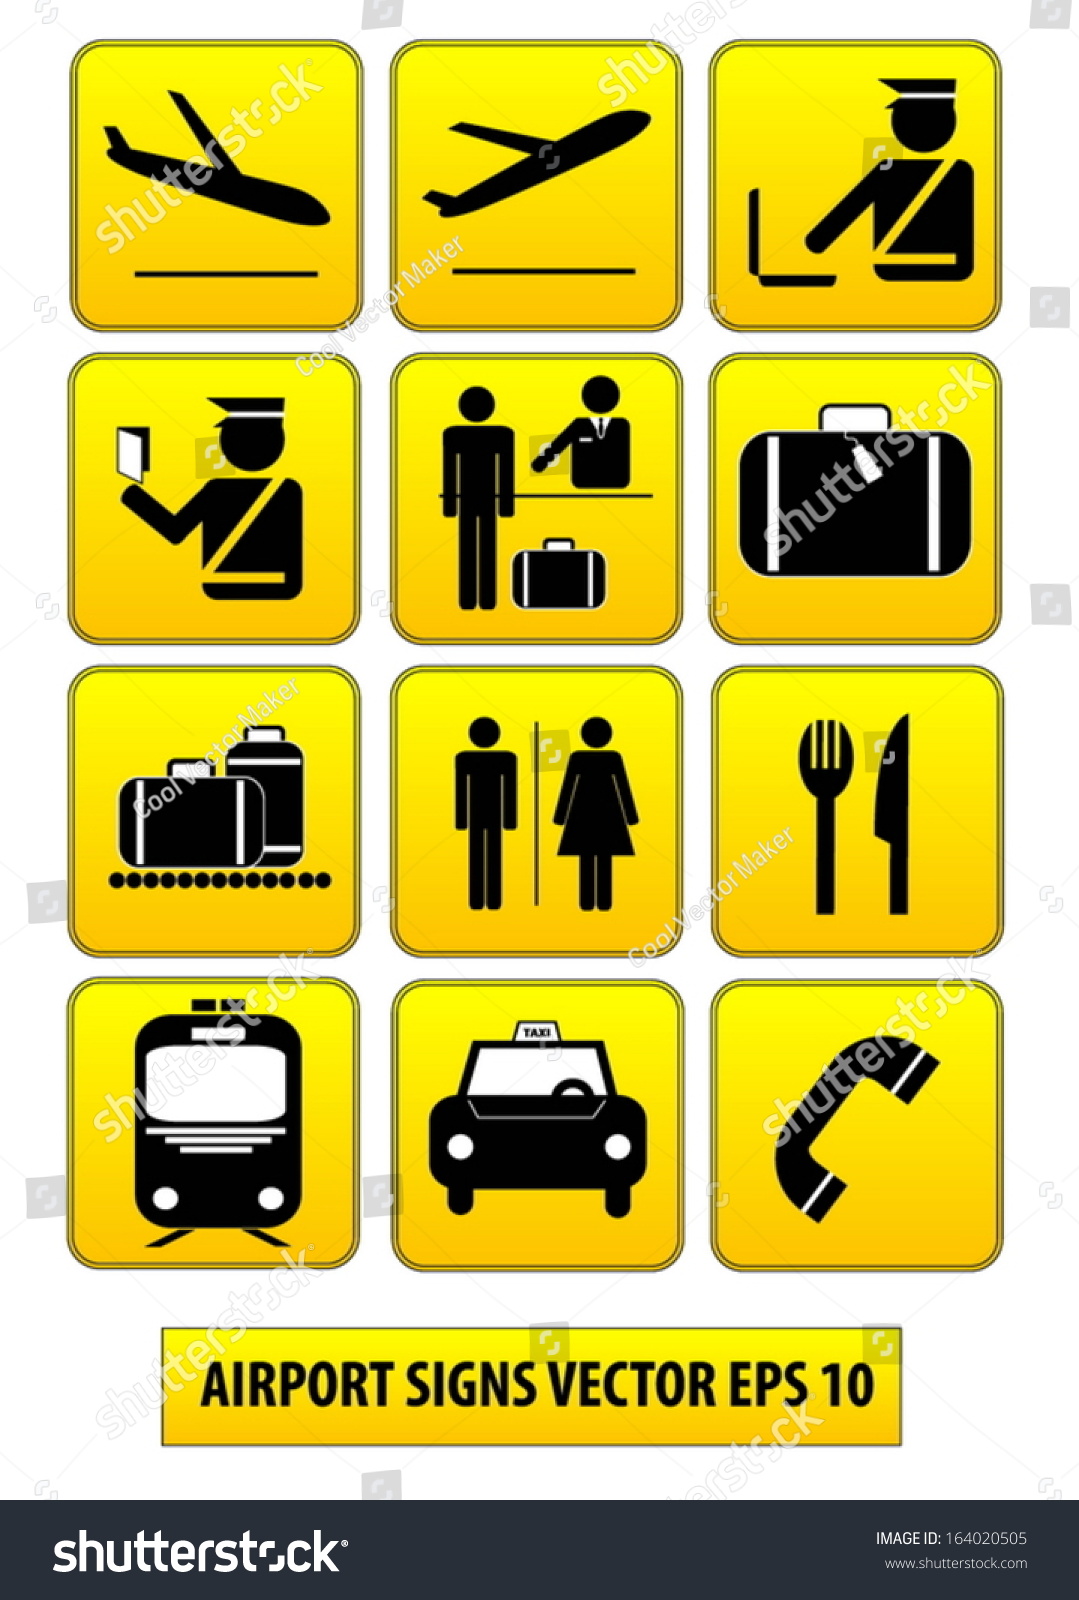 airport signs clipart - photo #35